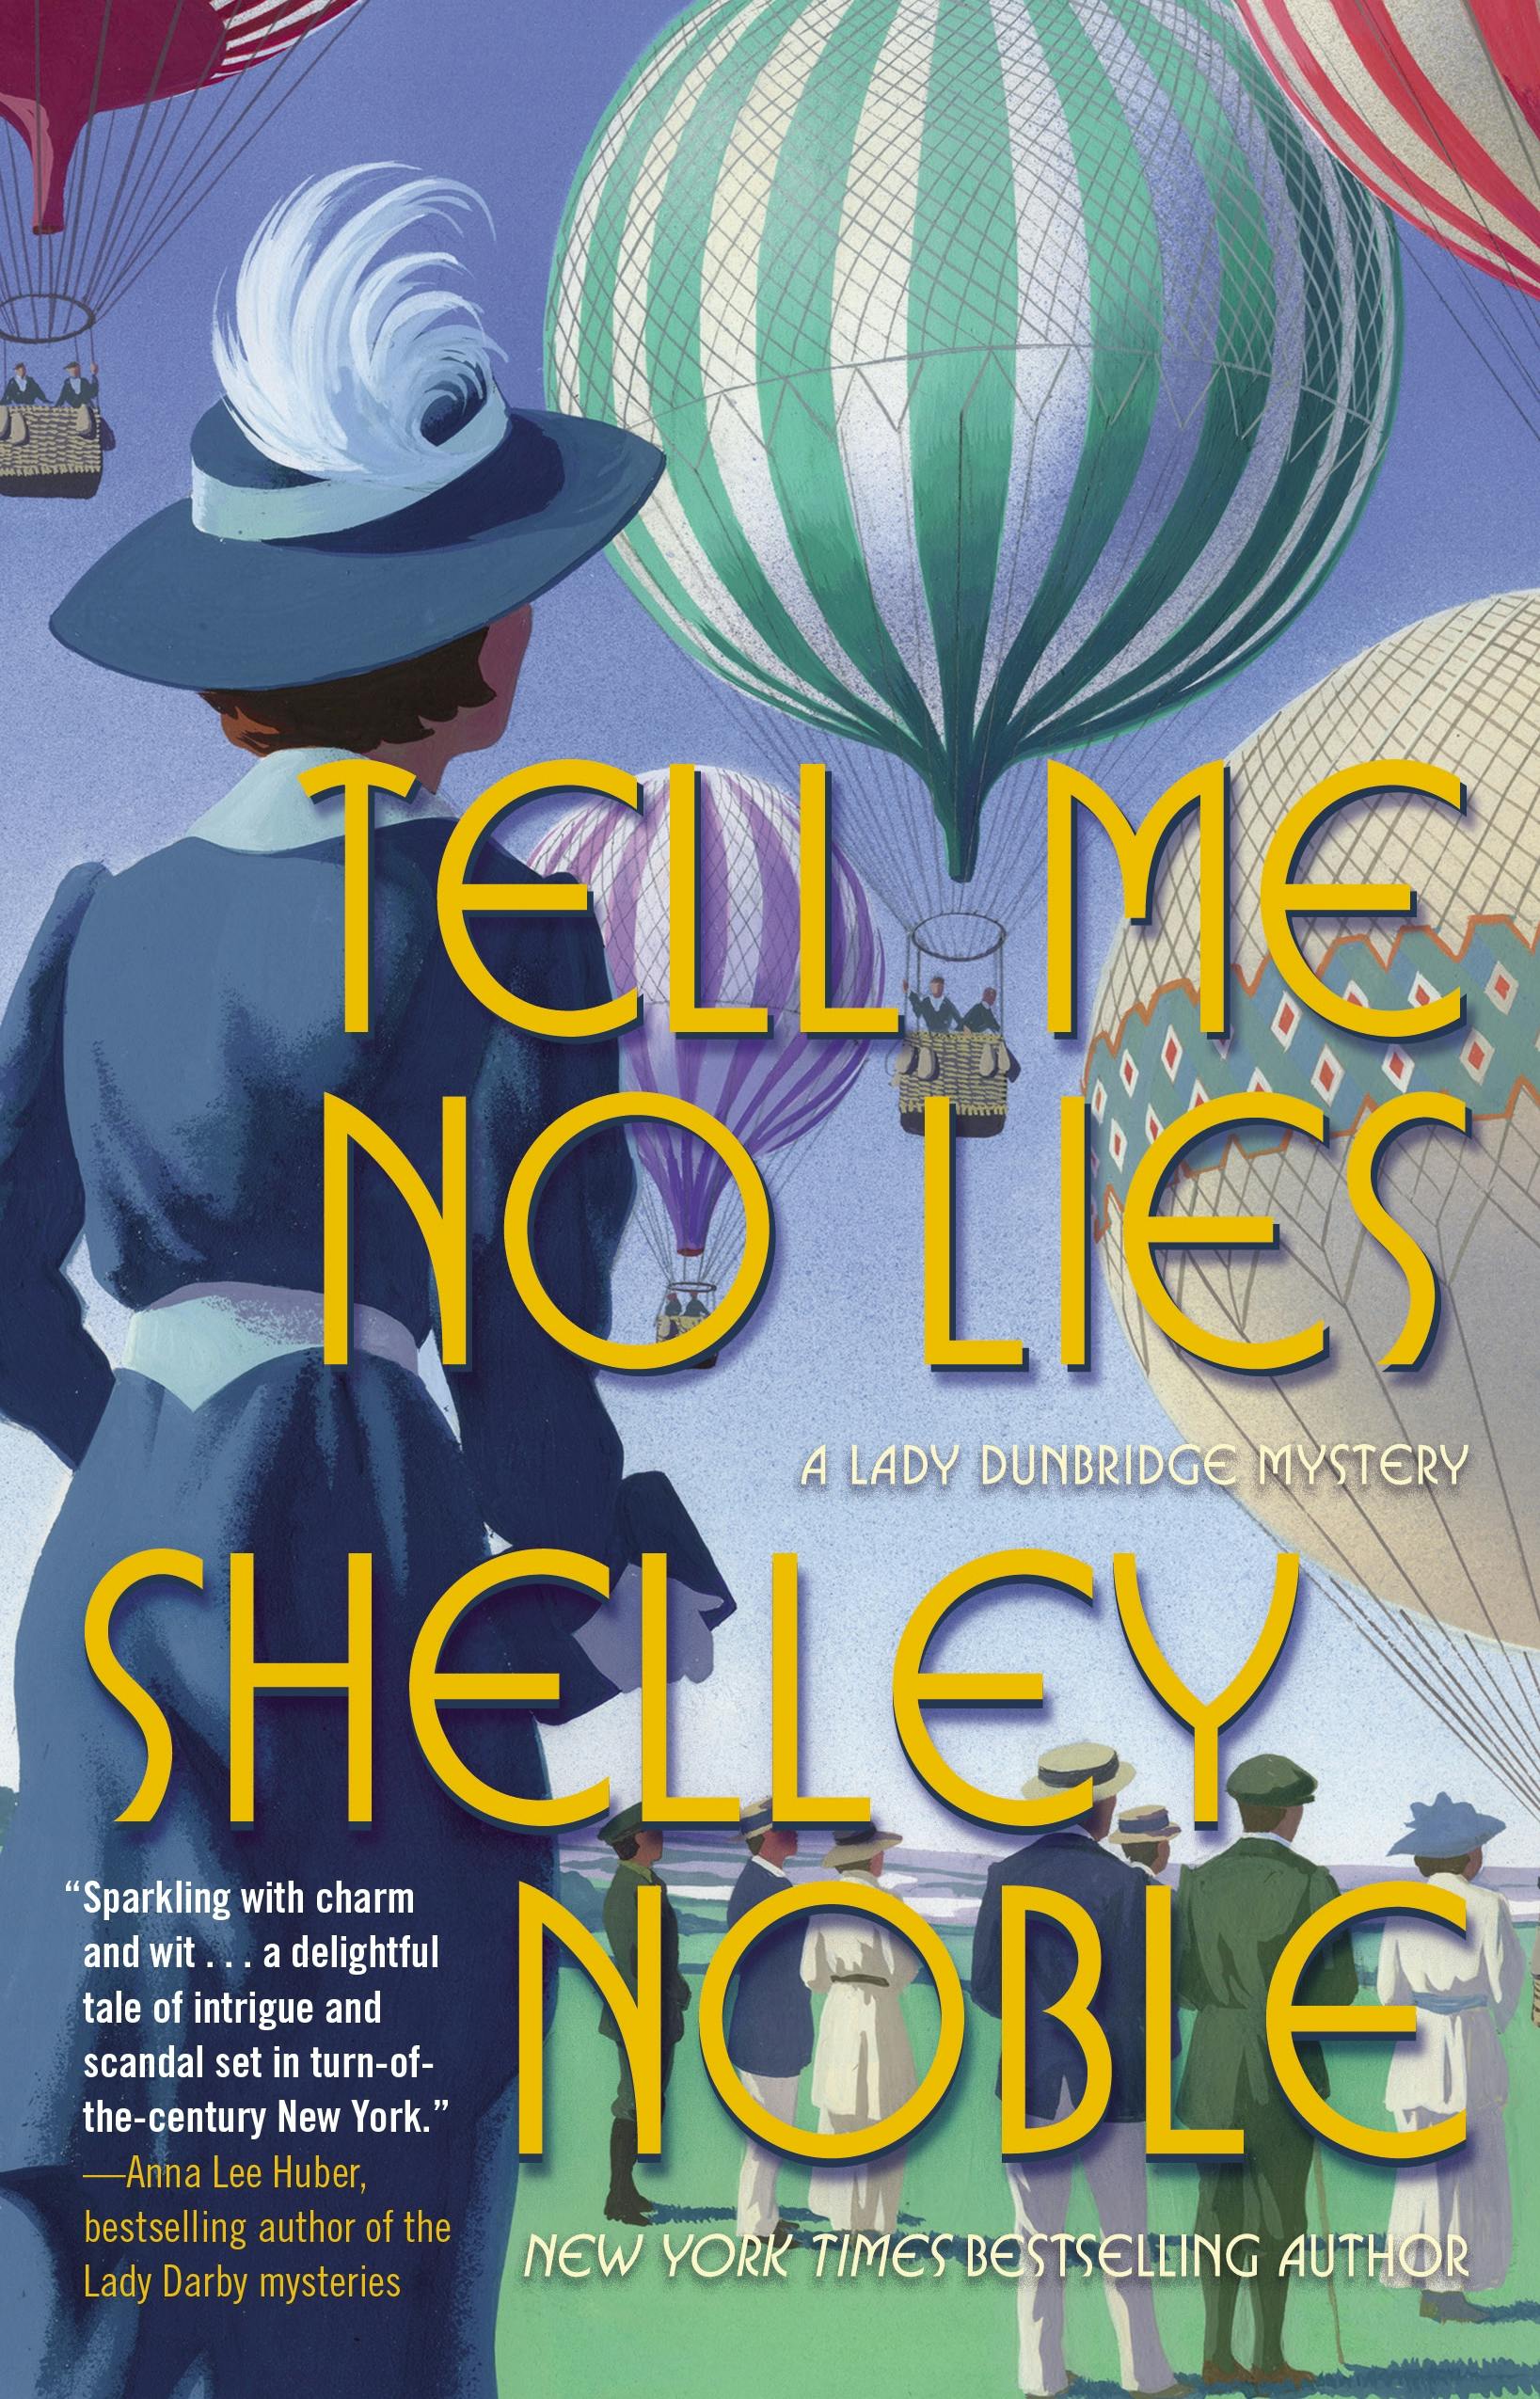 Cover for the book titled as: Tell Me No Lies